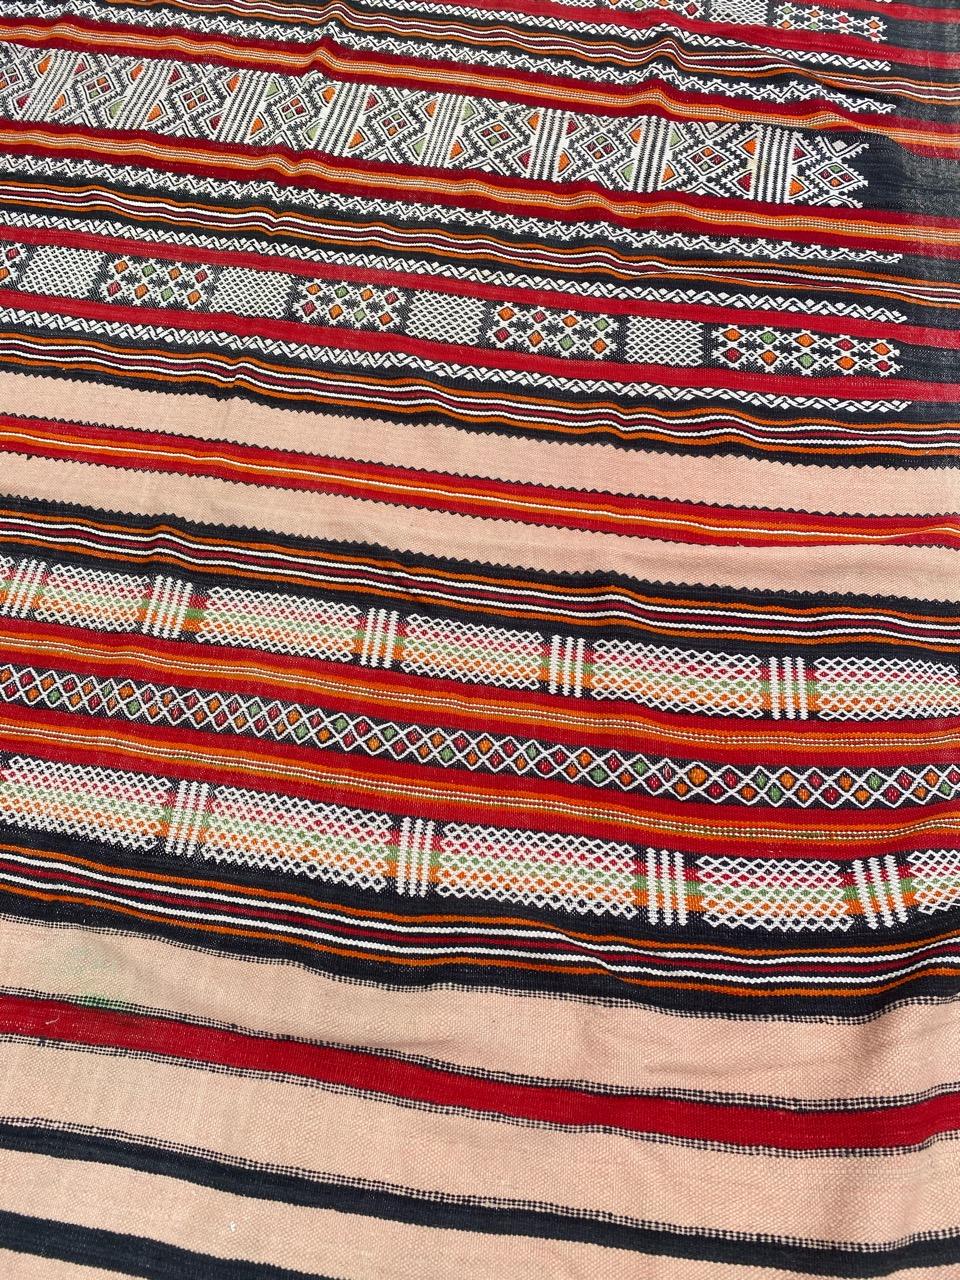 Nice mid century Moroccan soft Kilim with beautiful geometrical and tribal design and nice colors, entirely hand woven with wool on wool foundation.

✨✨✨
